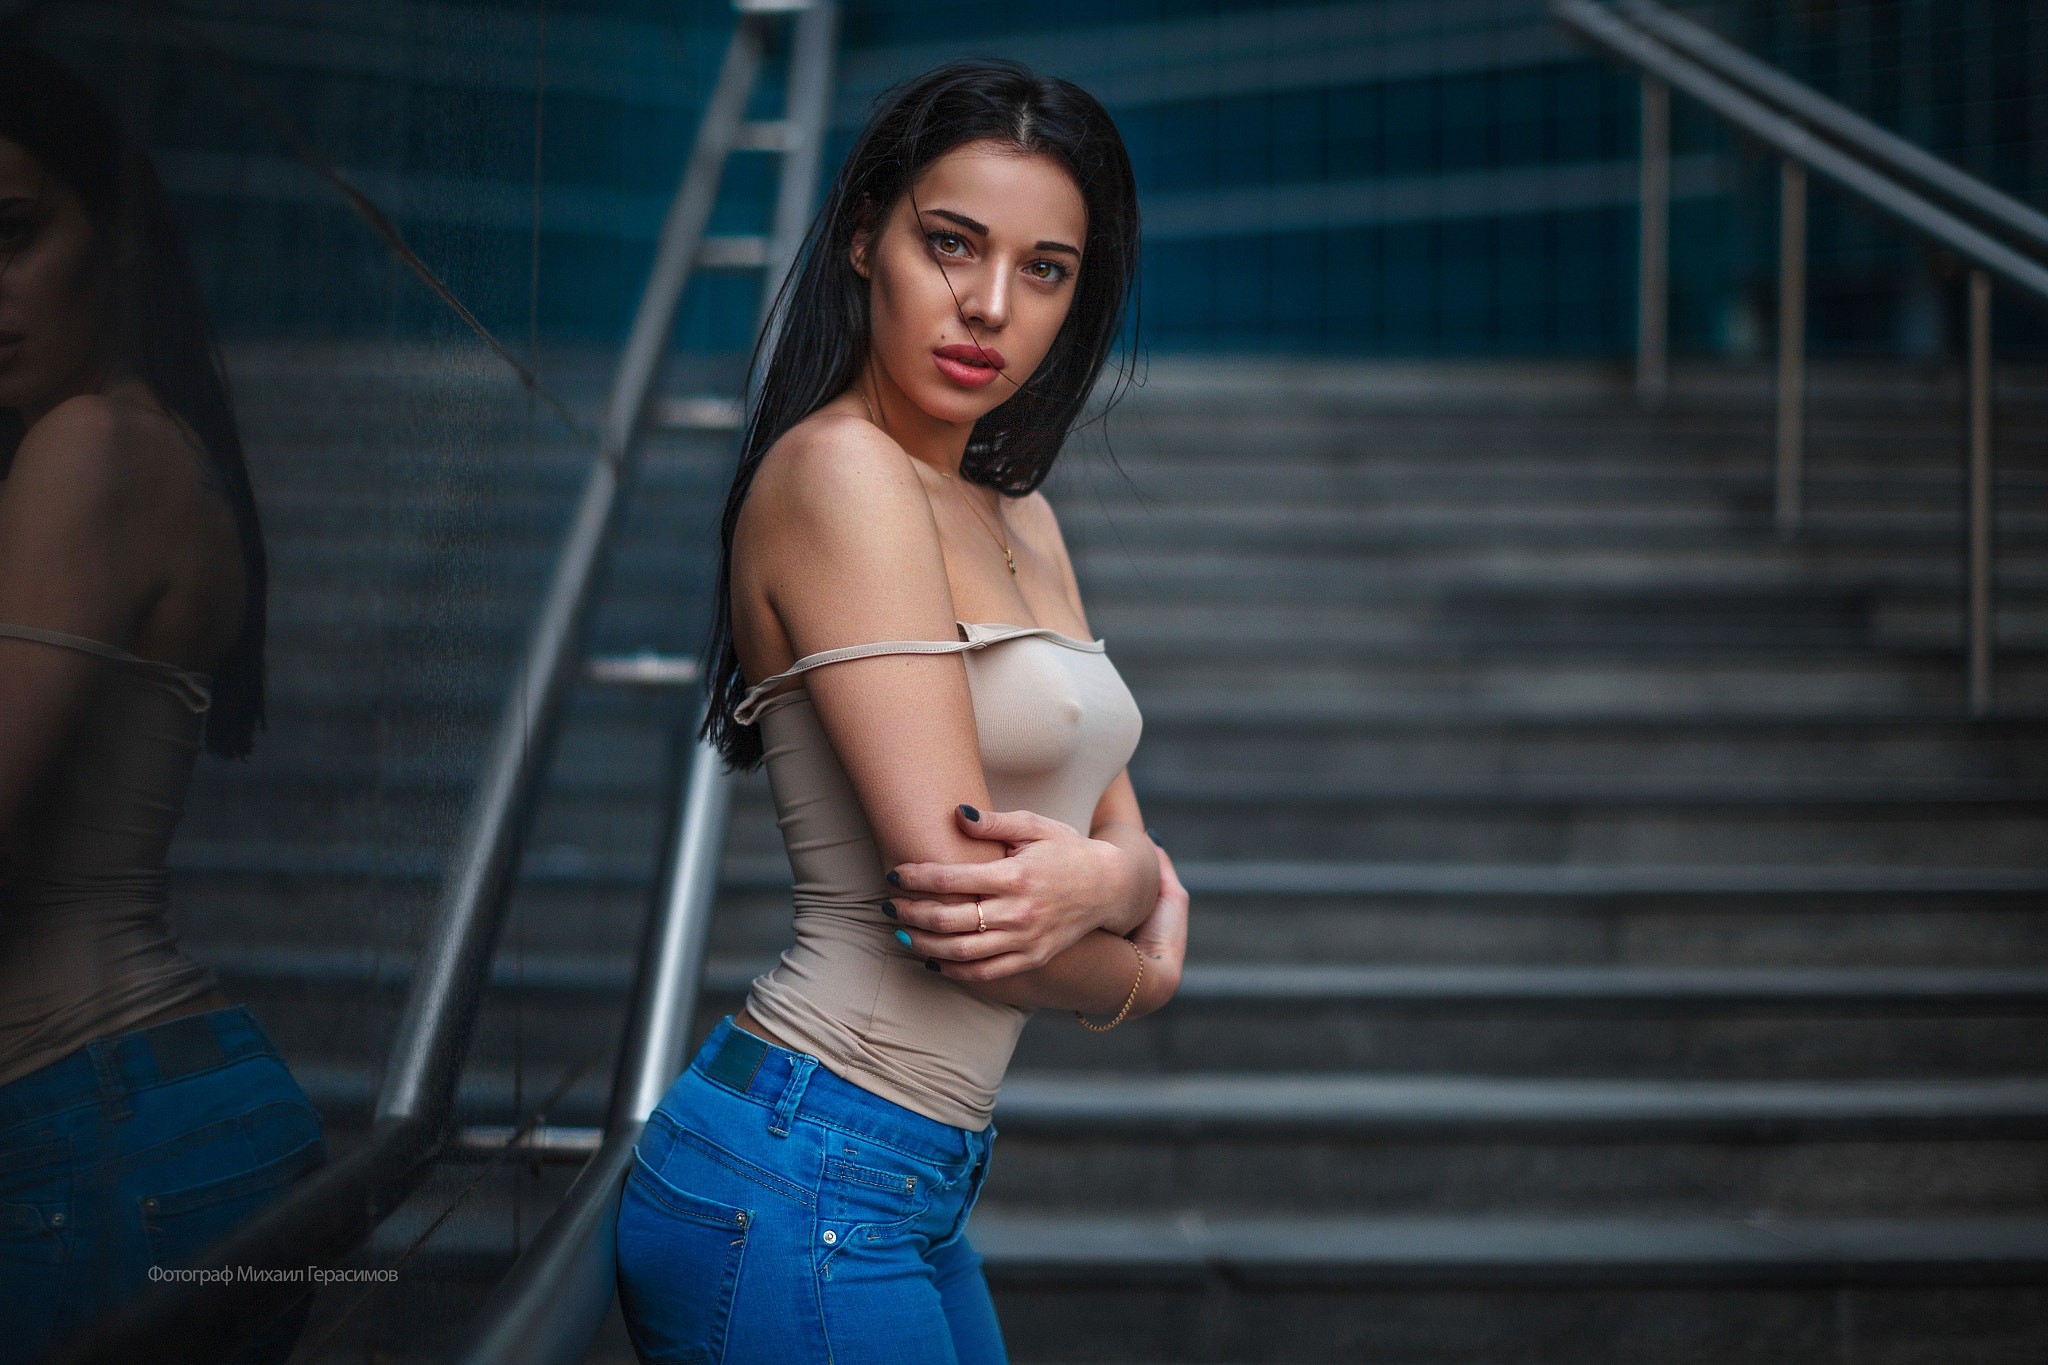 People 2048x1365 women portrait pants stairs brunette nipples through clothing reflection jeans arms crossed no bra